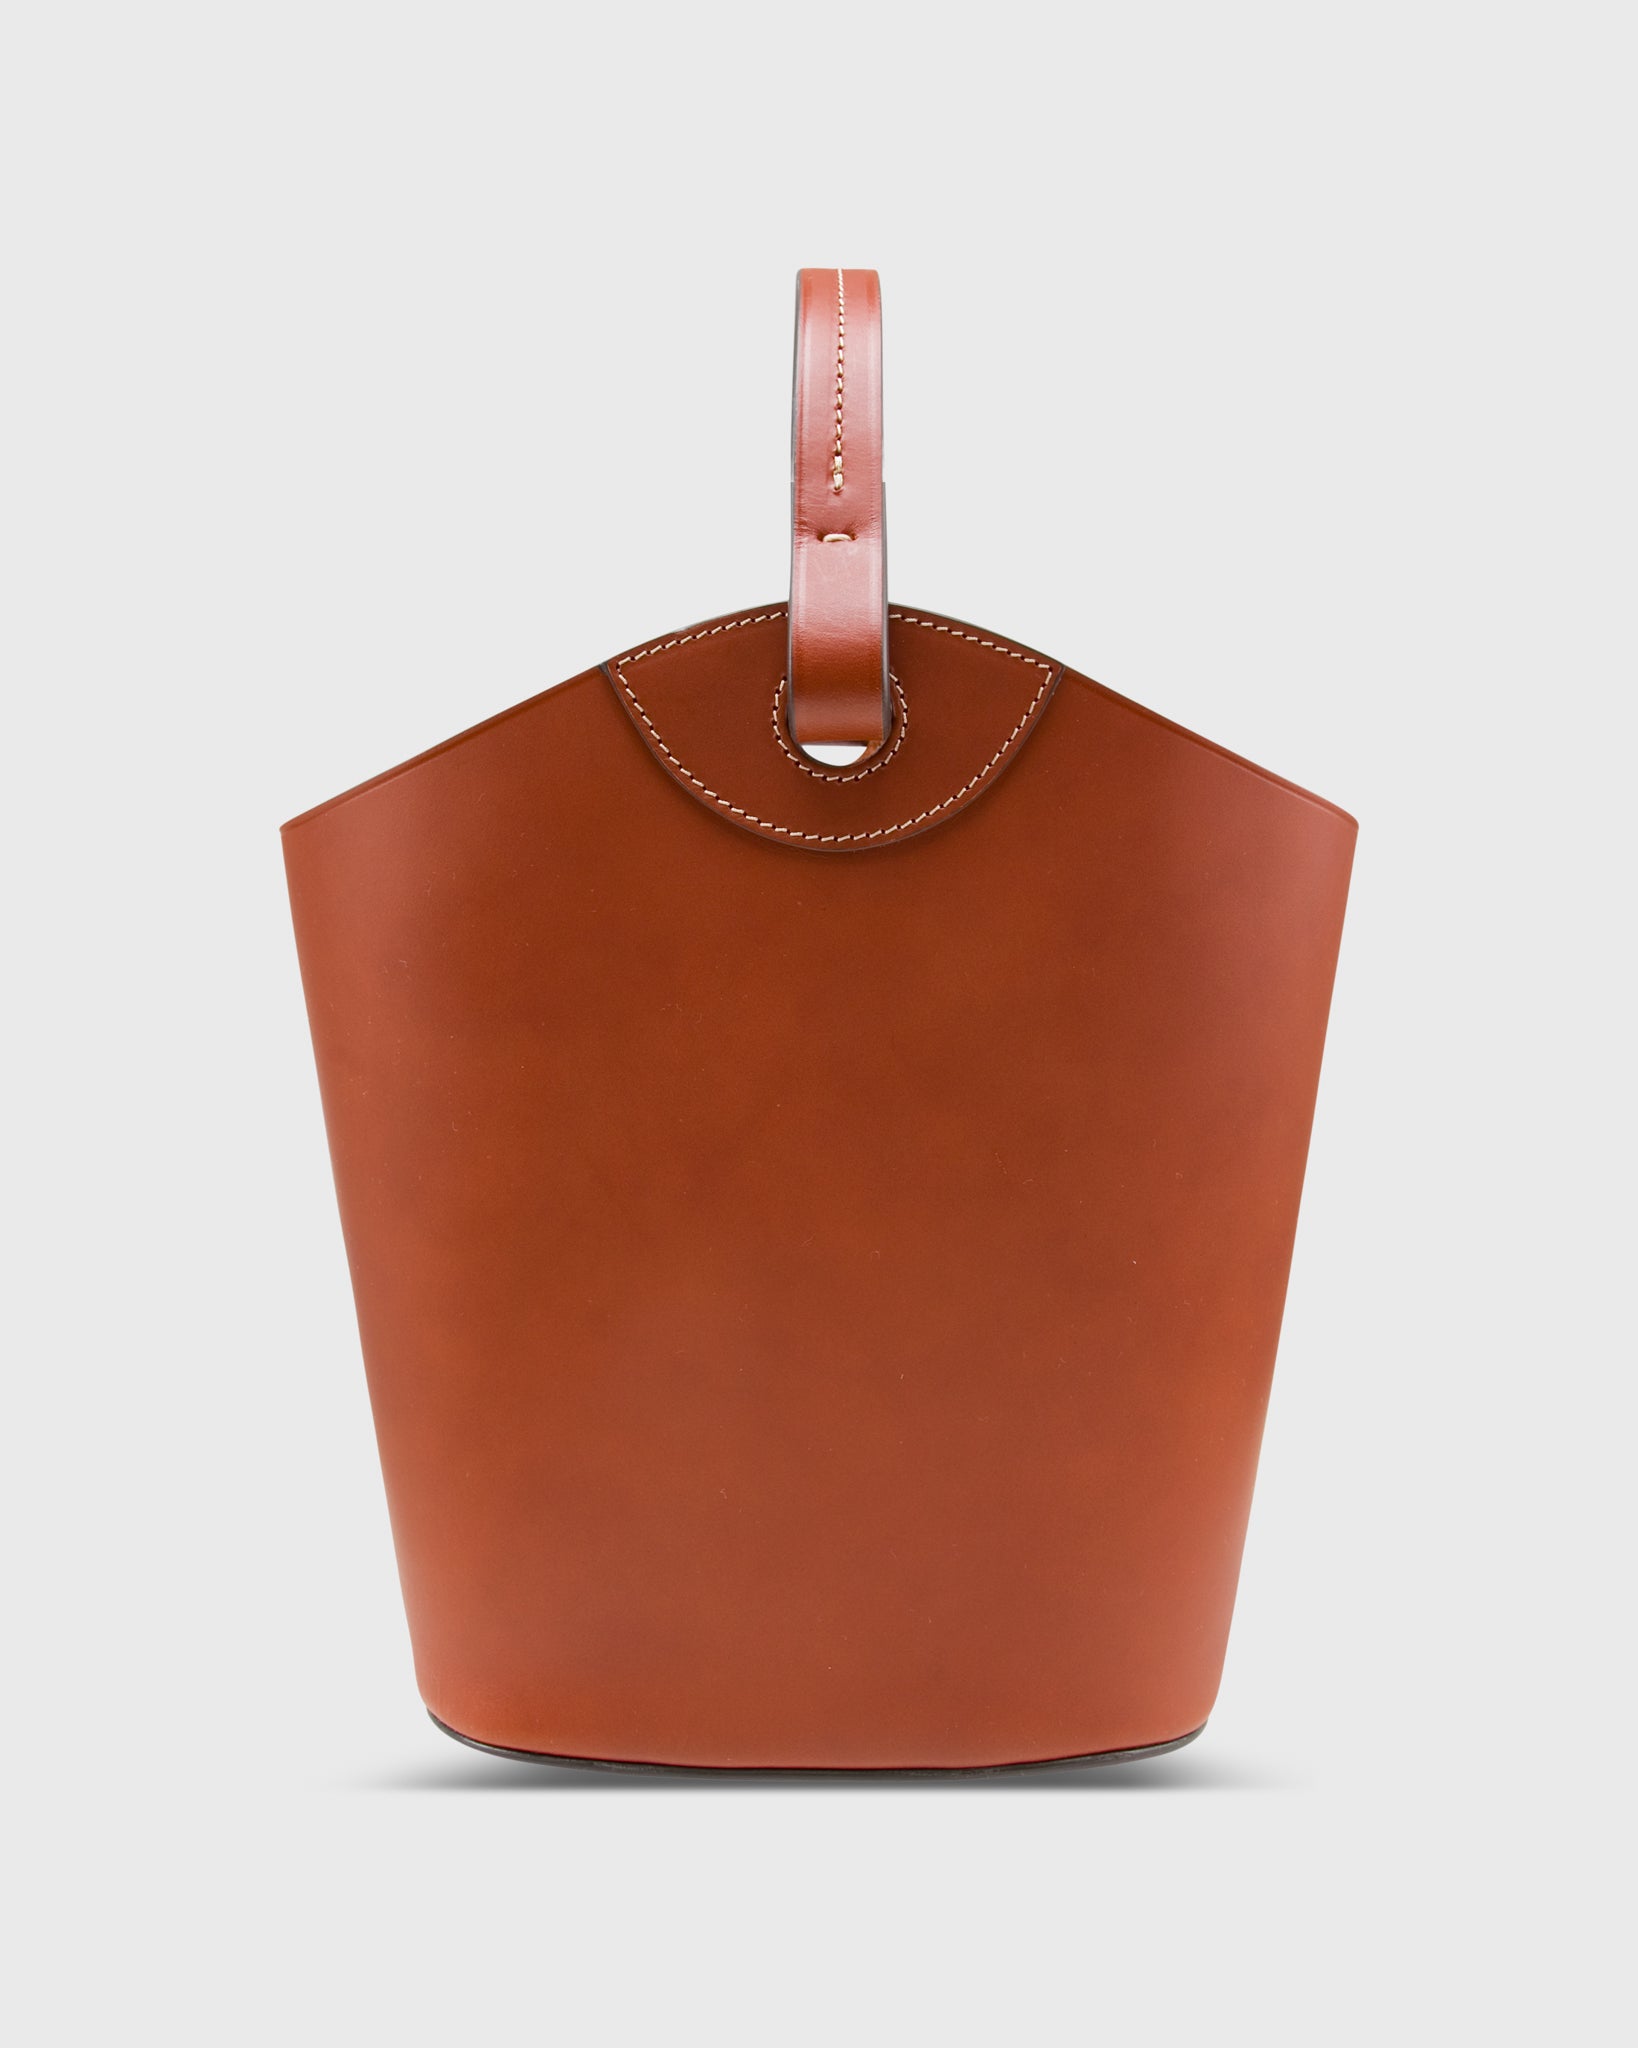 Leather Tote Bag | Bucket Tote Shopper Purse of Quality | Love 41